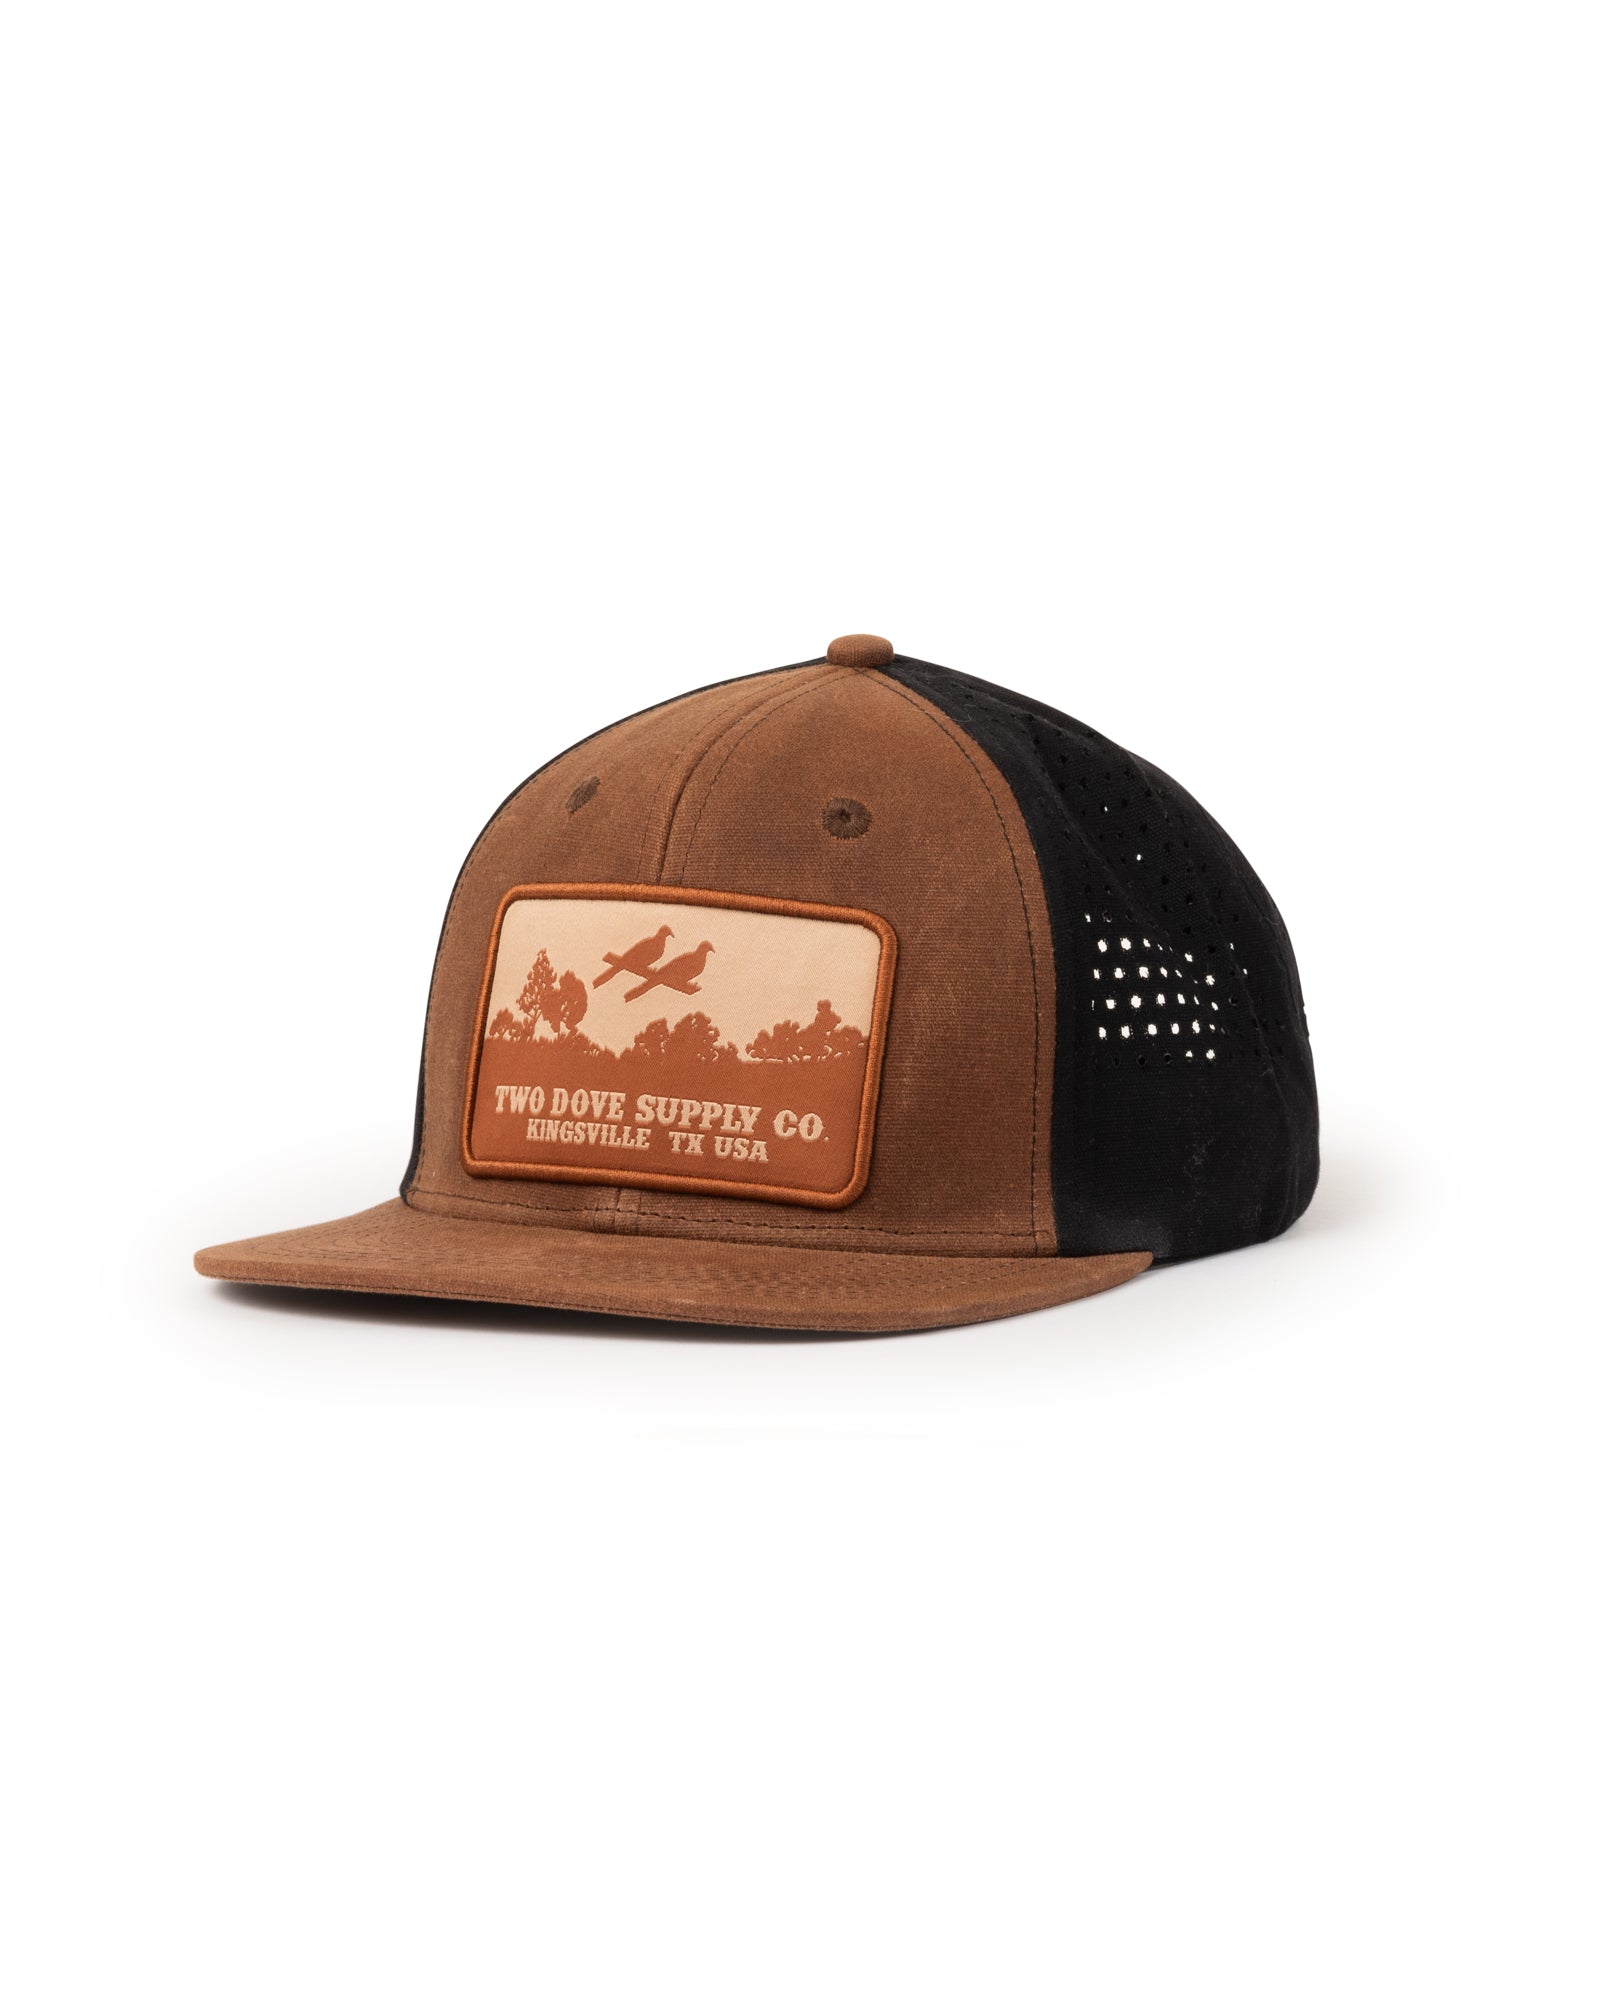 Kingsville Leather Patch Waxed Cotton Perforated Snapback - Brown/Black